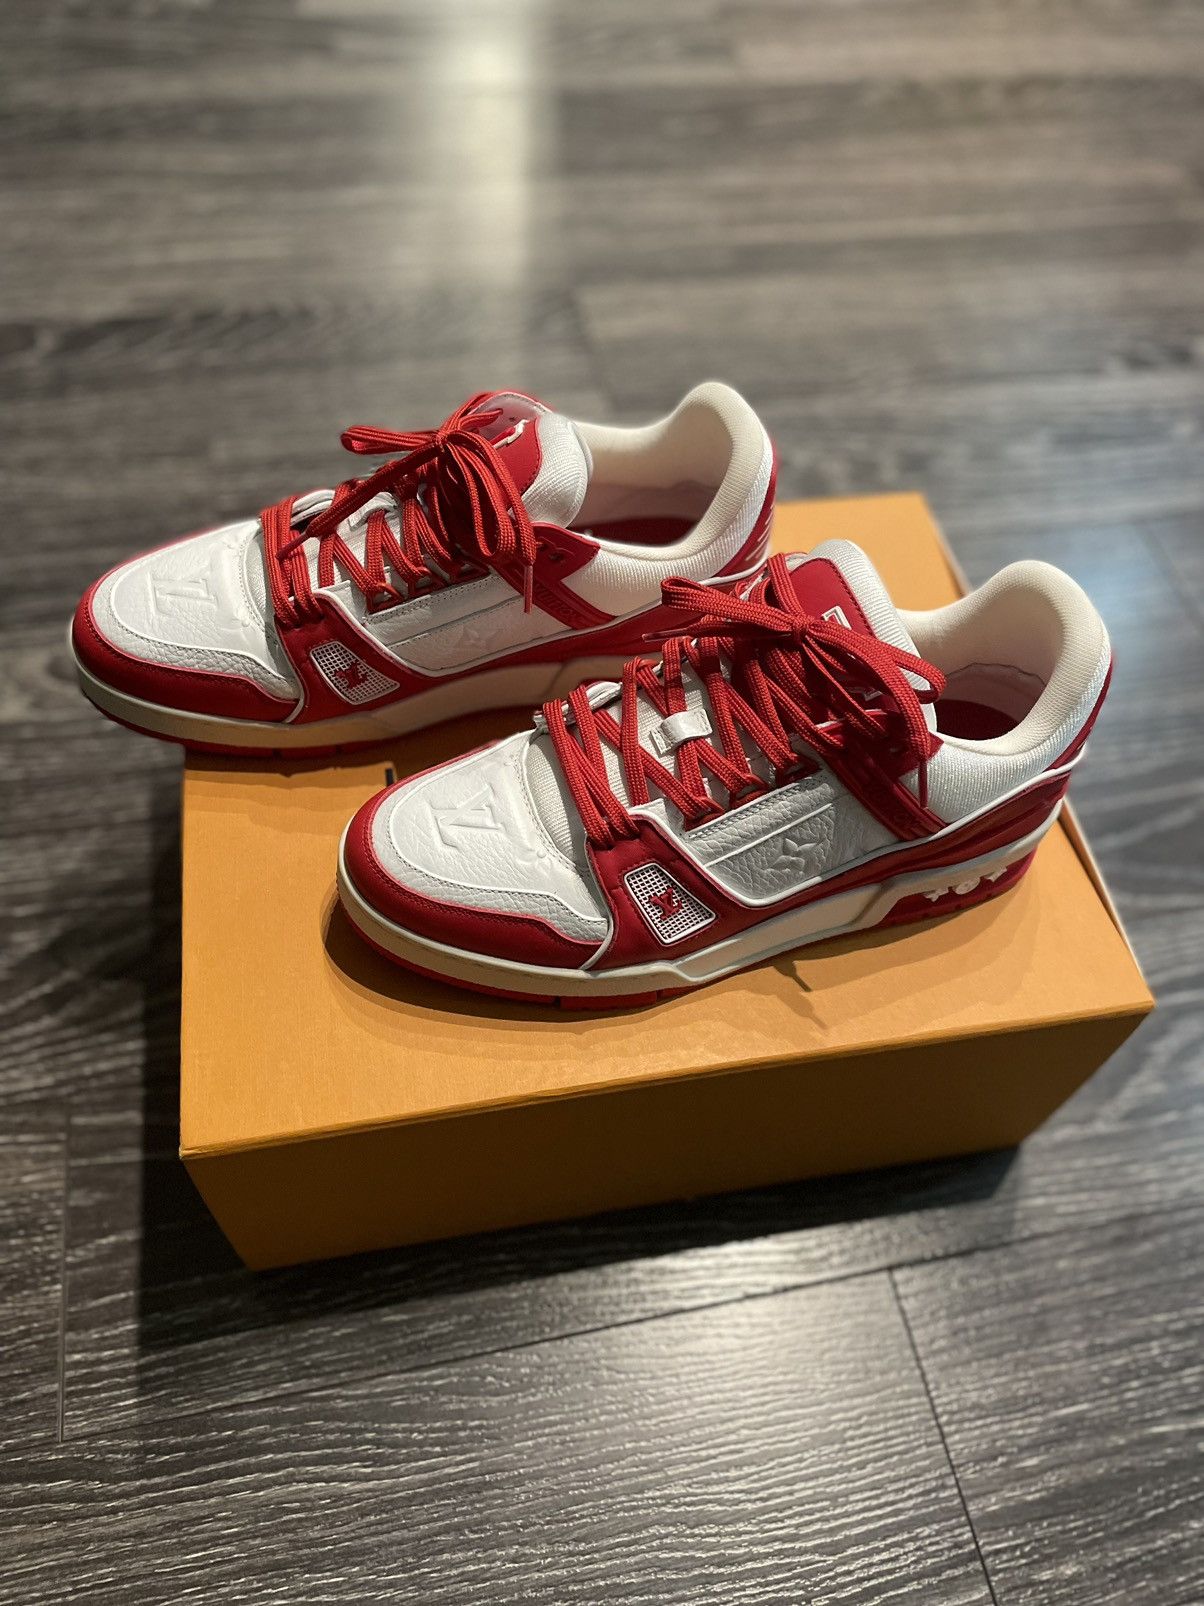 LV Trainer Sneaker - Shoes 1ABFBE